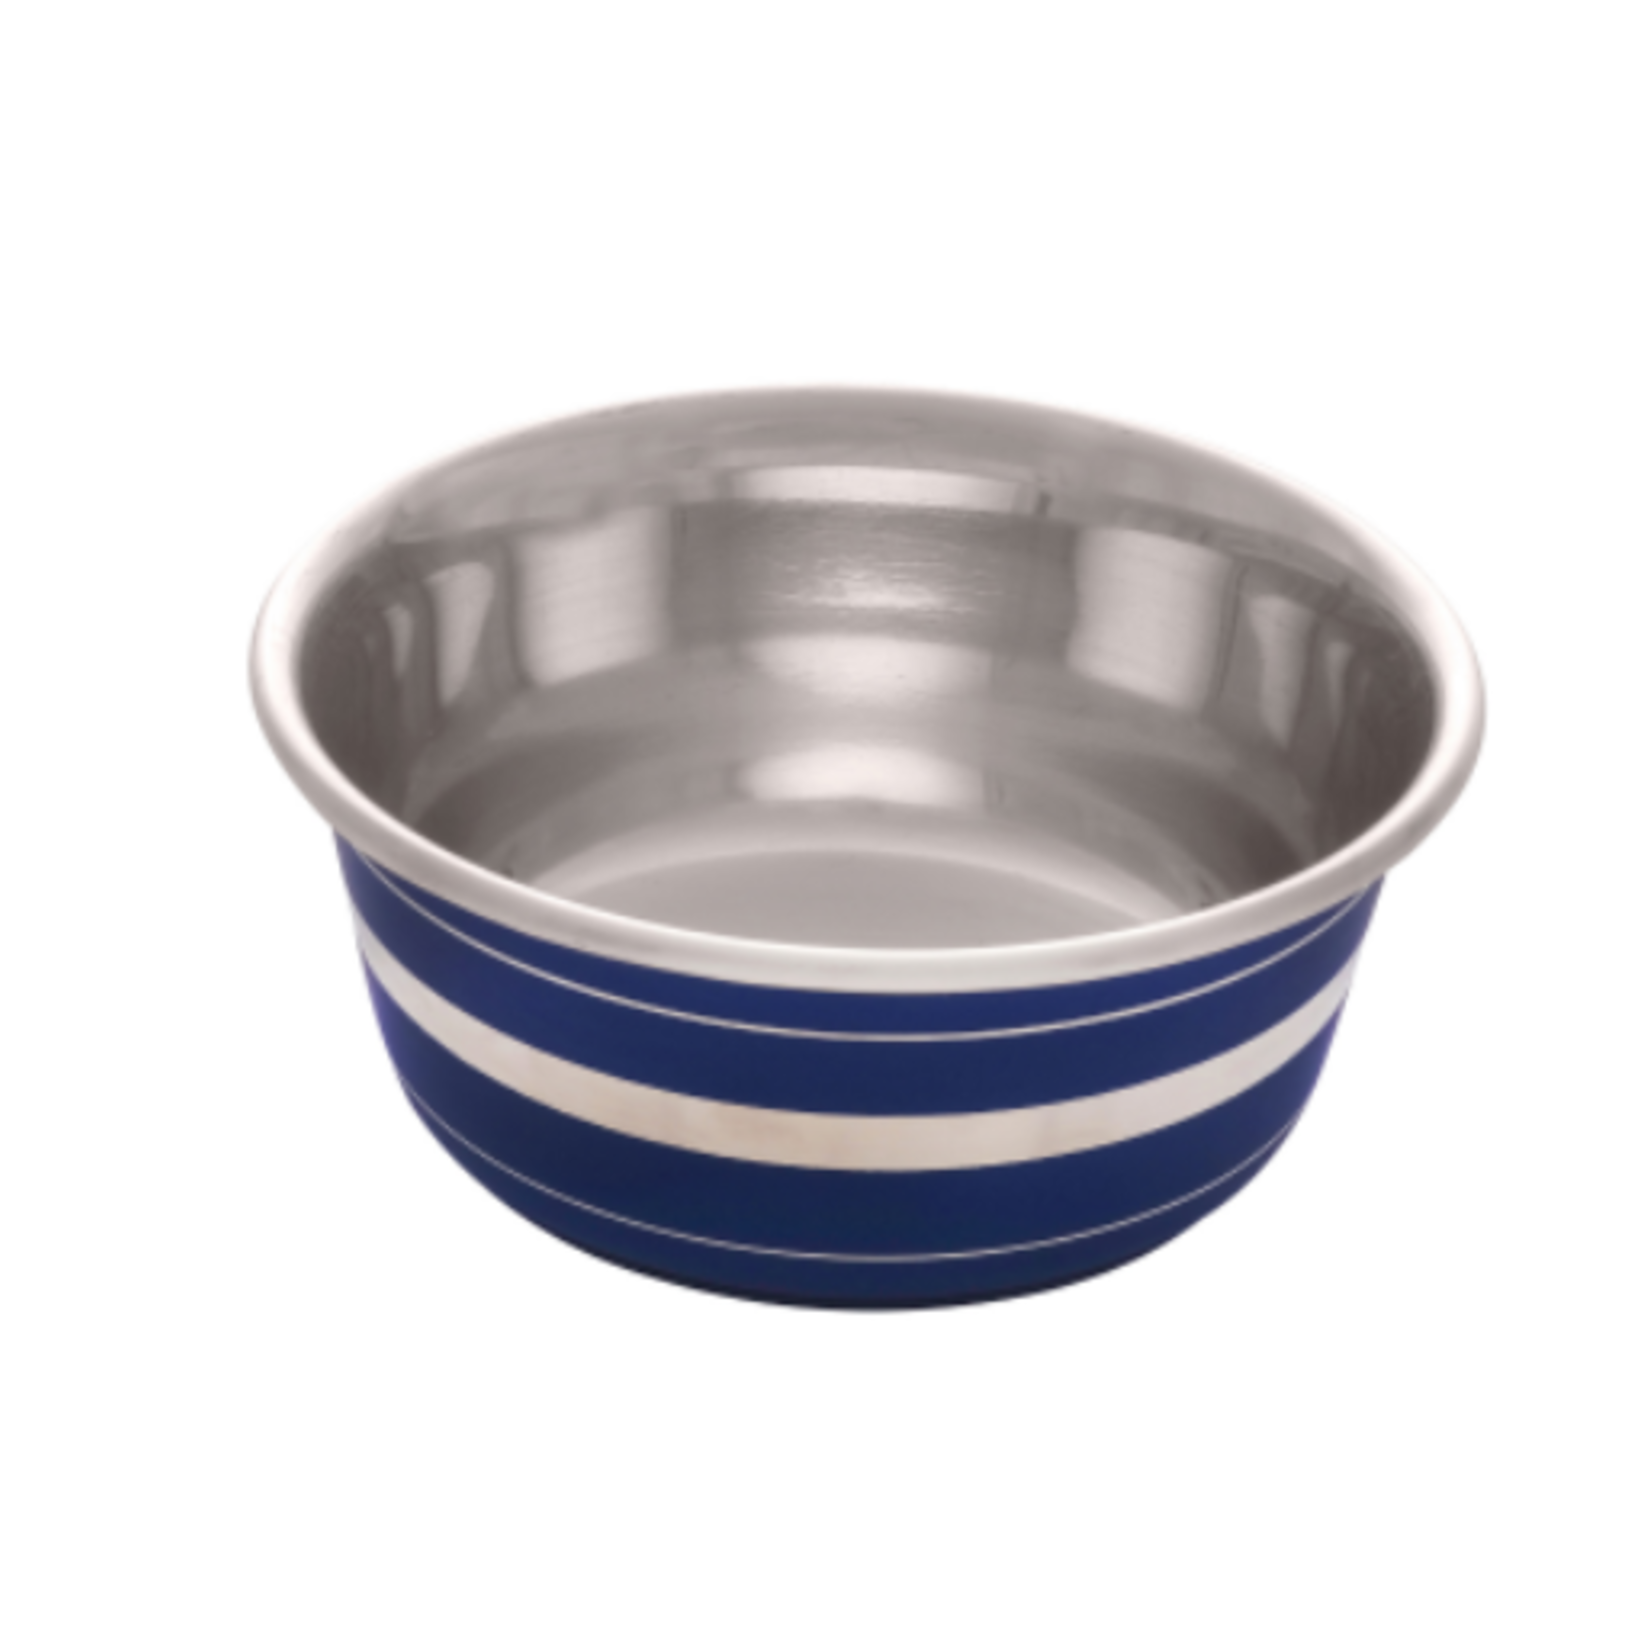 Dogit Stainless Steel Non-Skid Bowl - Blue Striped - 350 ml